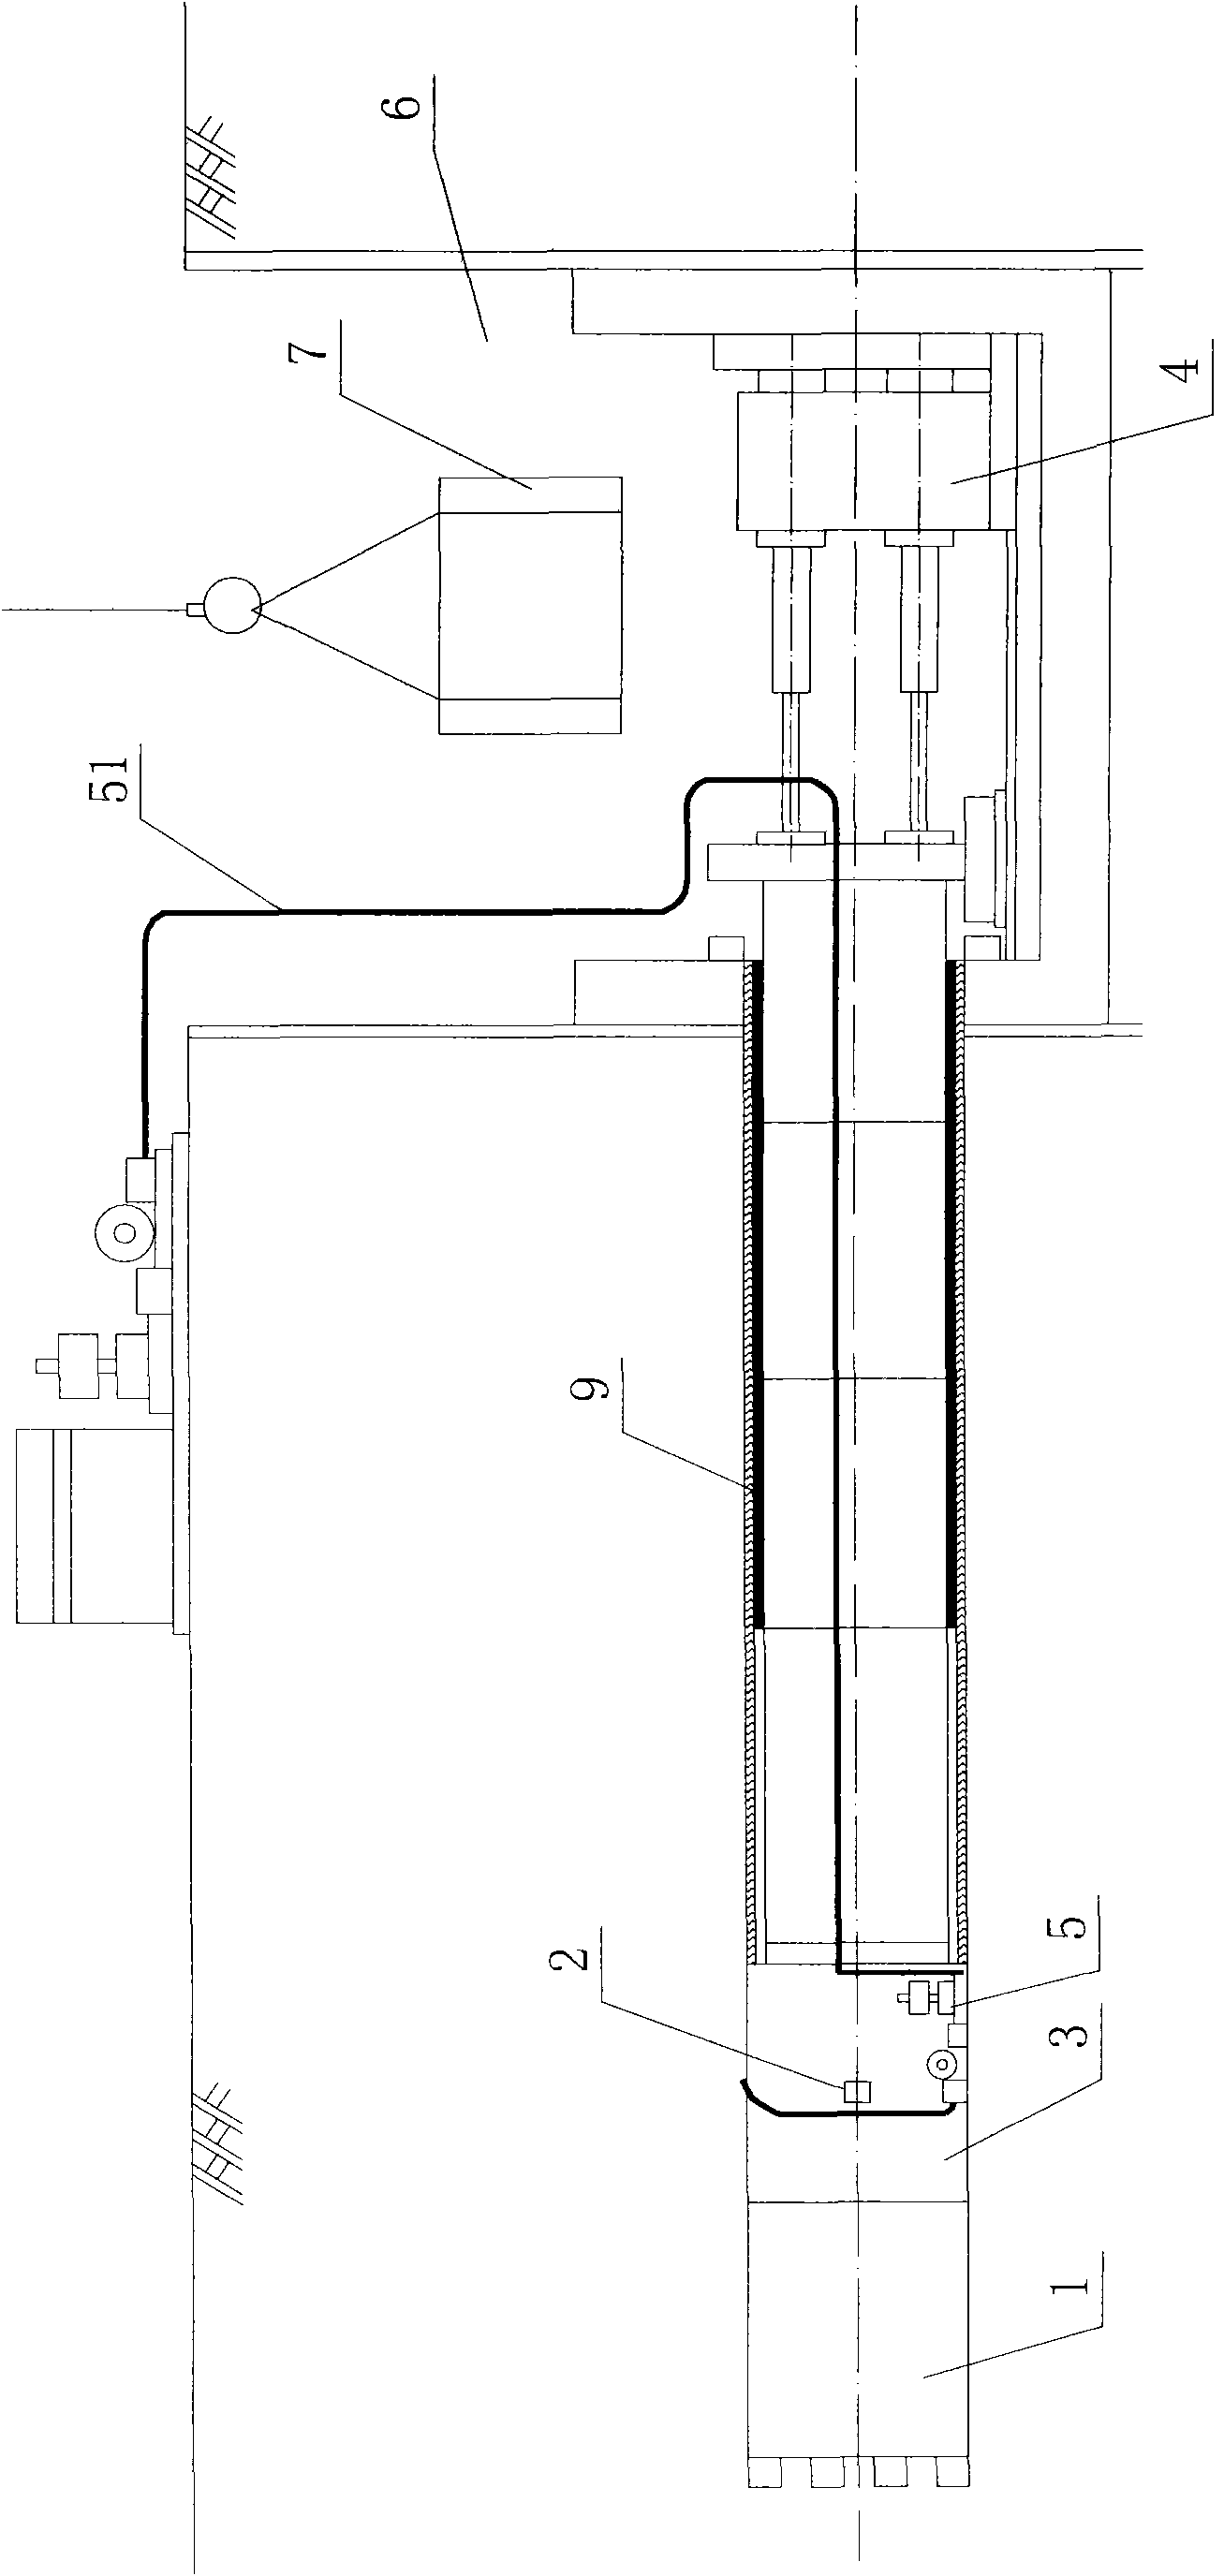 Small-bore long distance curved pipe jacking method